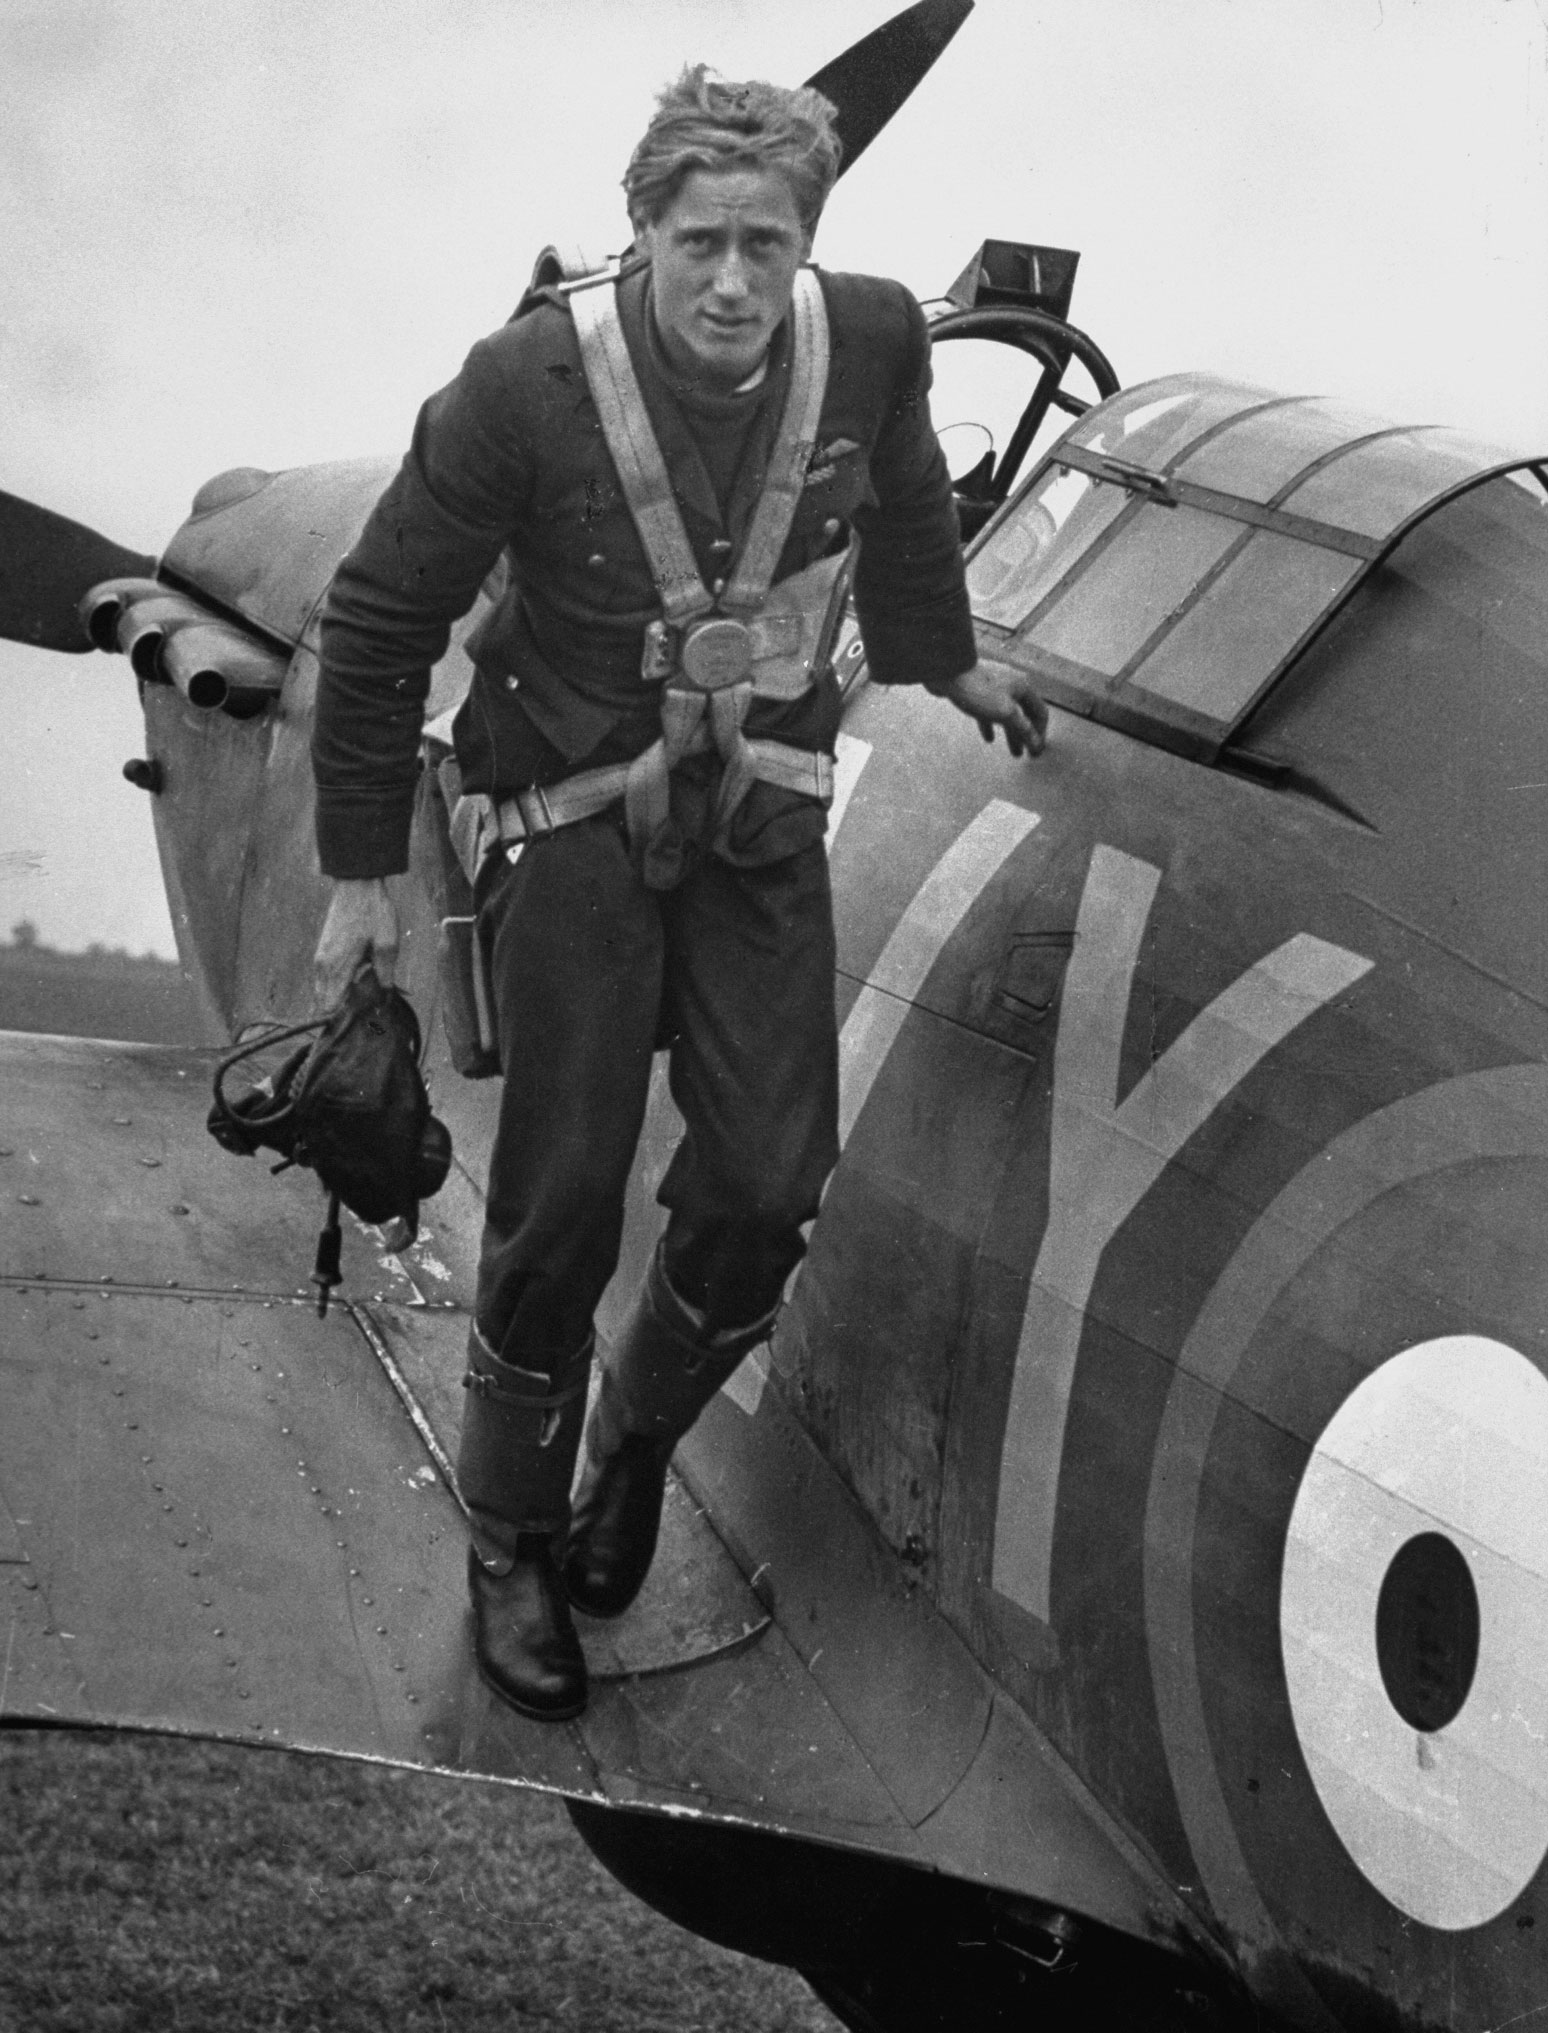 Royal Air Force ace Albert Gerald Lewis climbs out of his plane after an air battle above England, 1940.